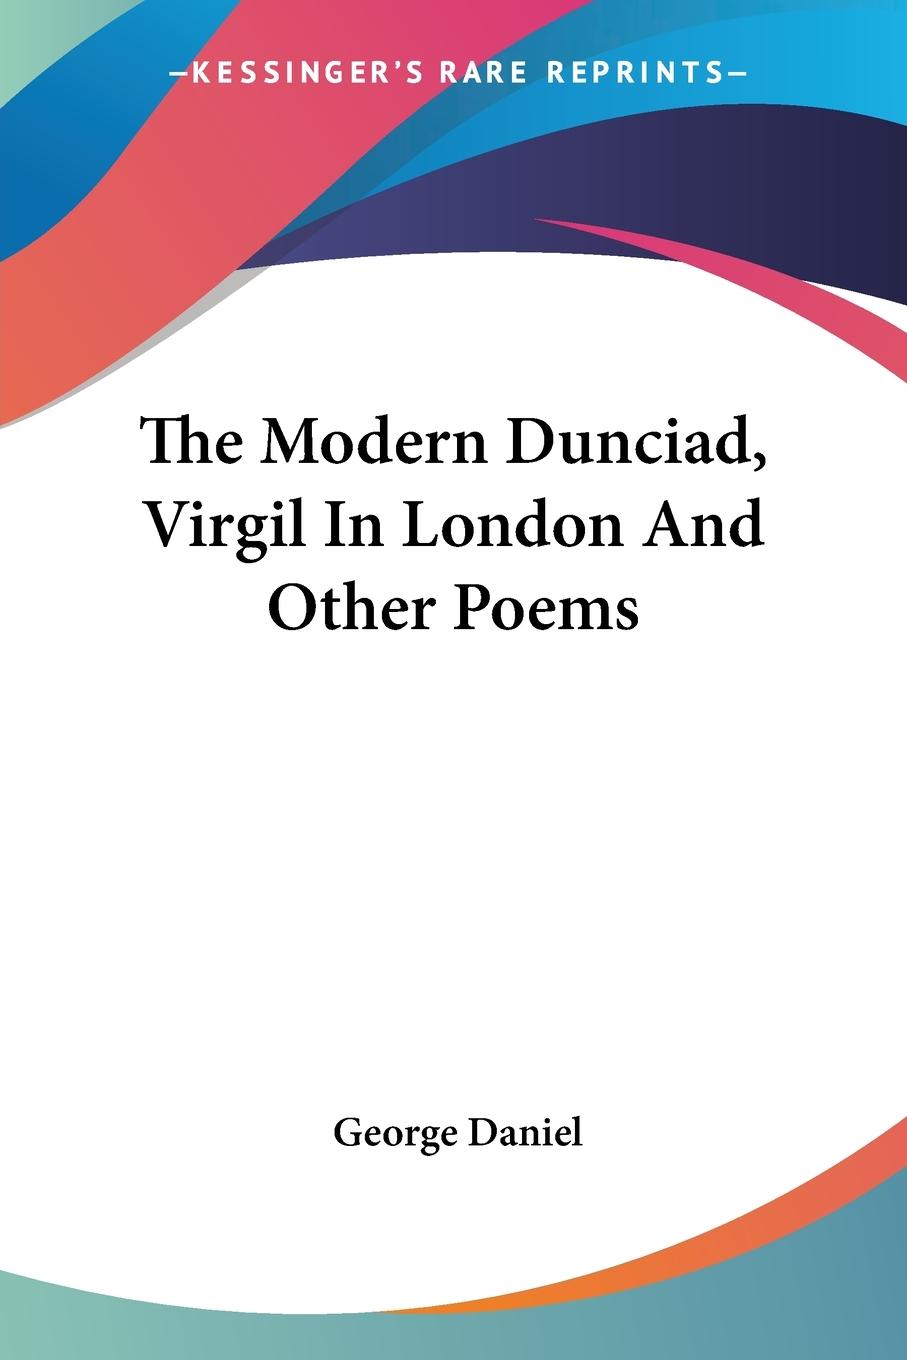 The Modern Dunciad, Virgil In London And Other Poems - Daniel, George